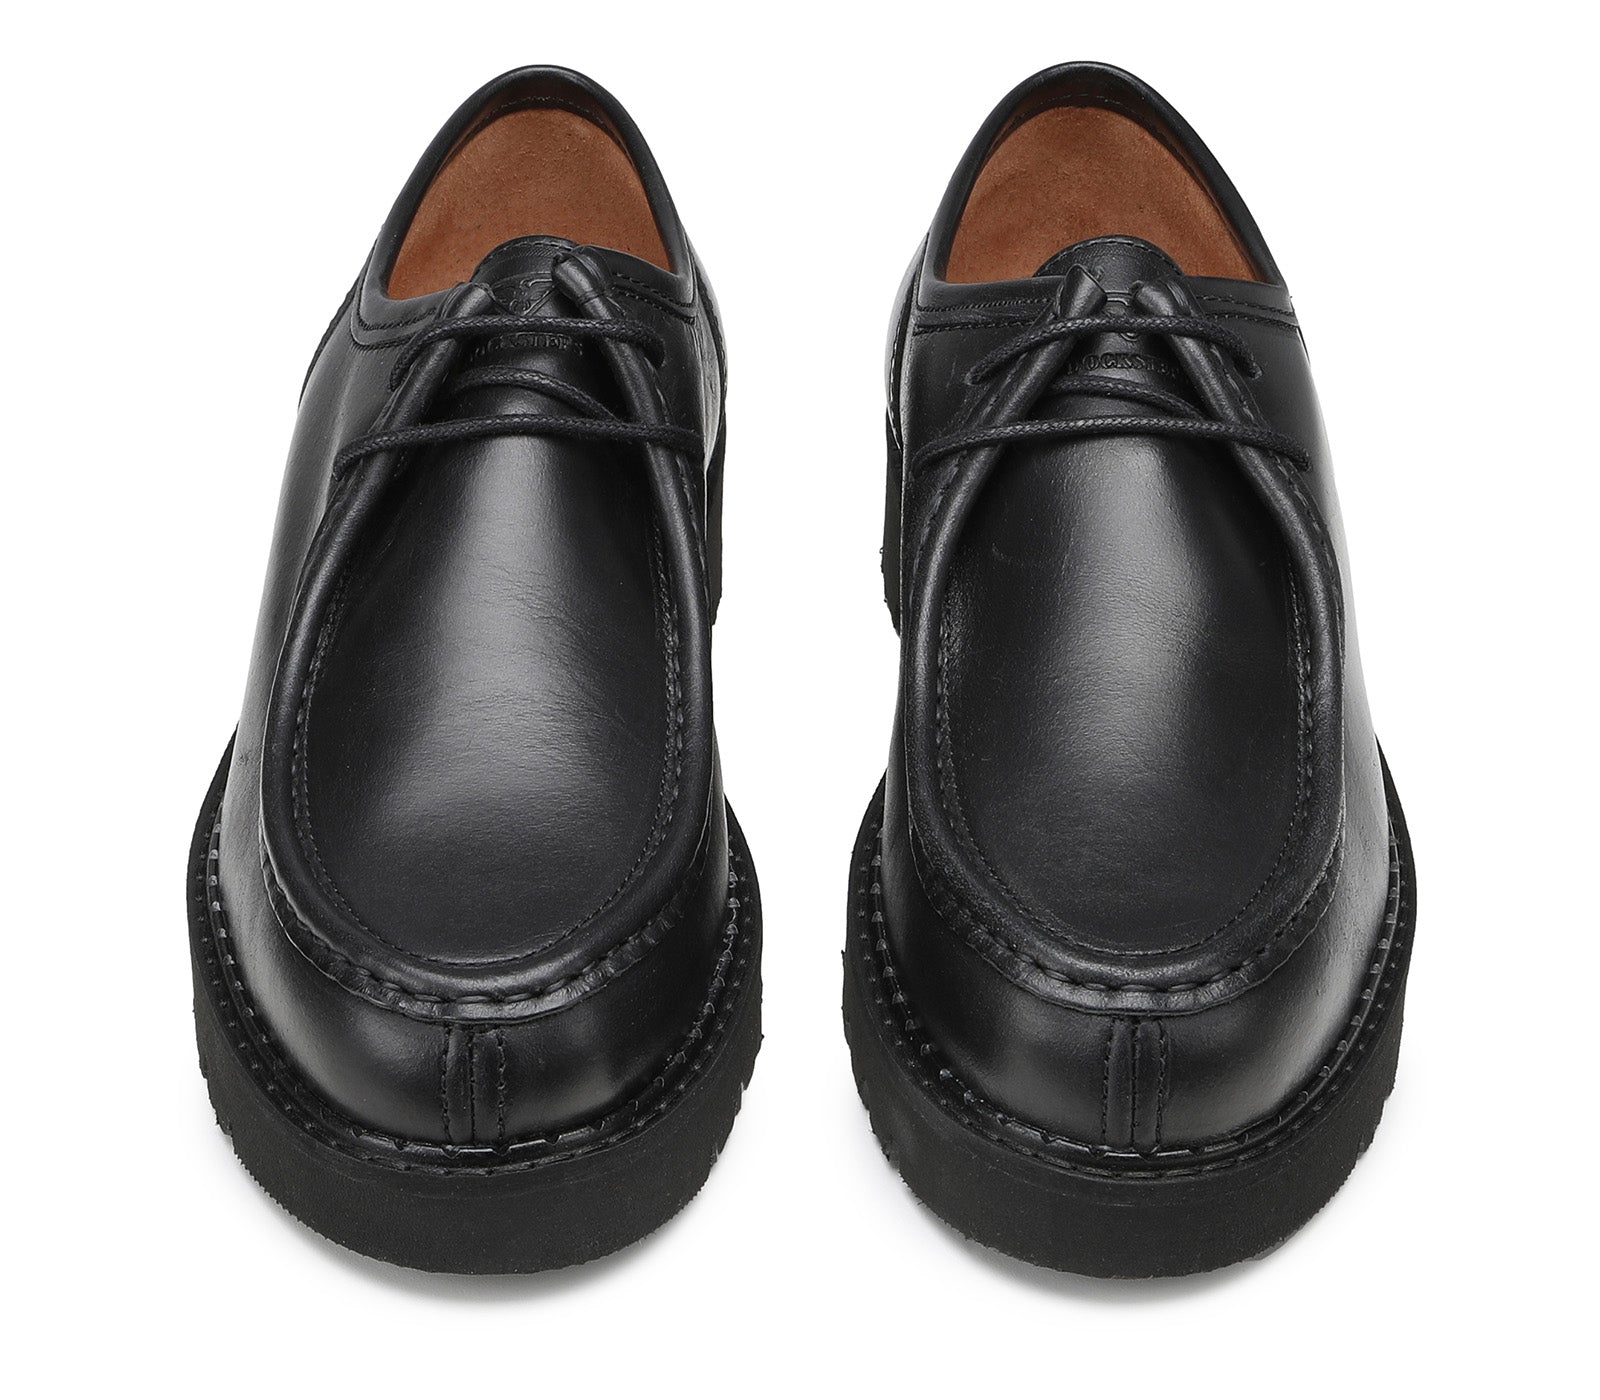 Black Men's Moccasin with Laces and Carrarmato Sole